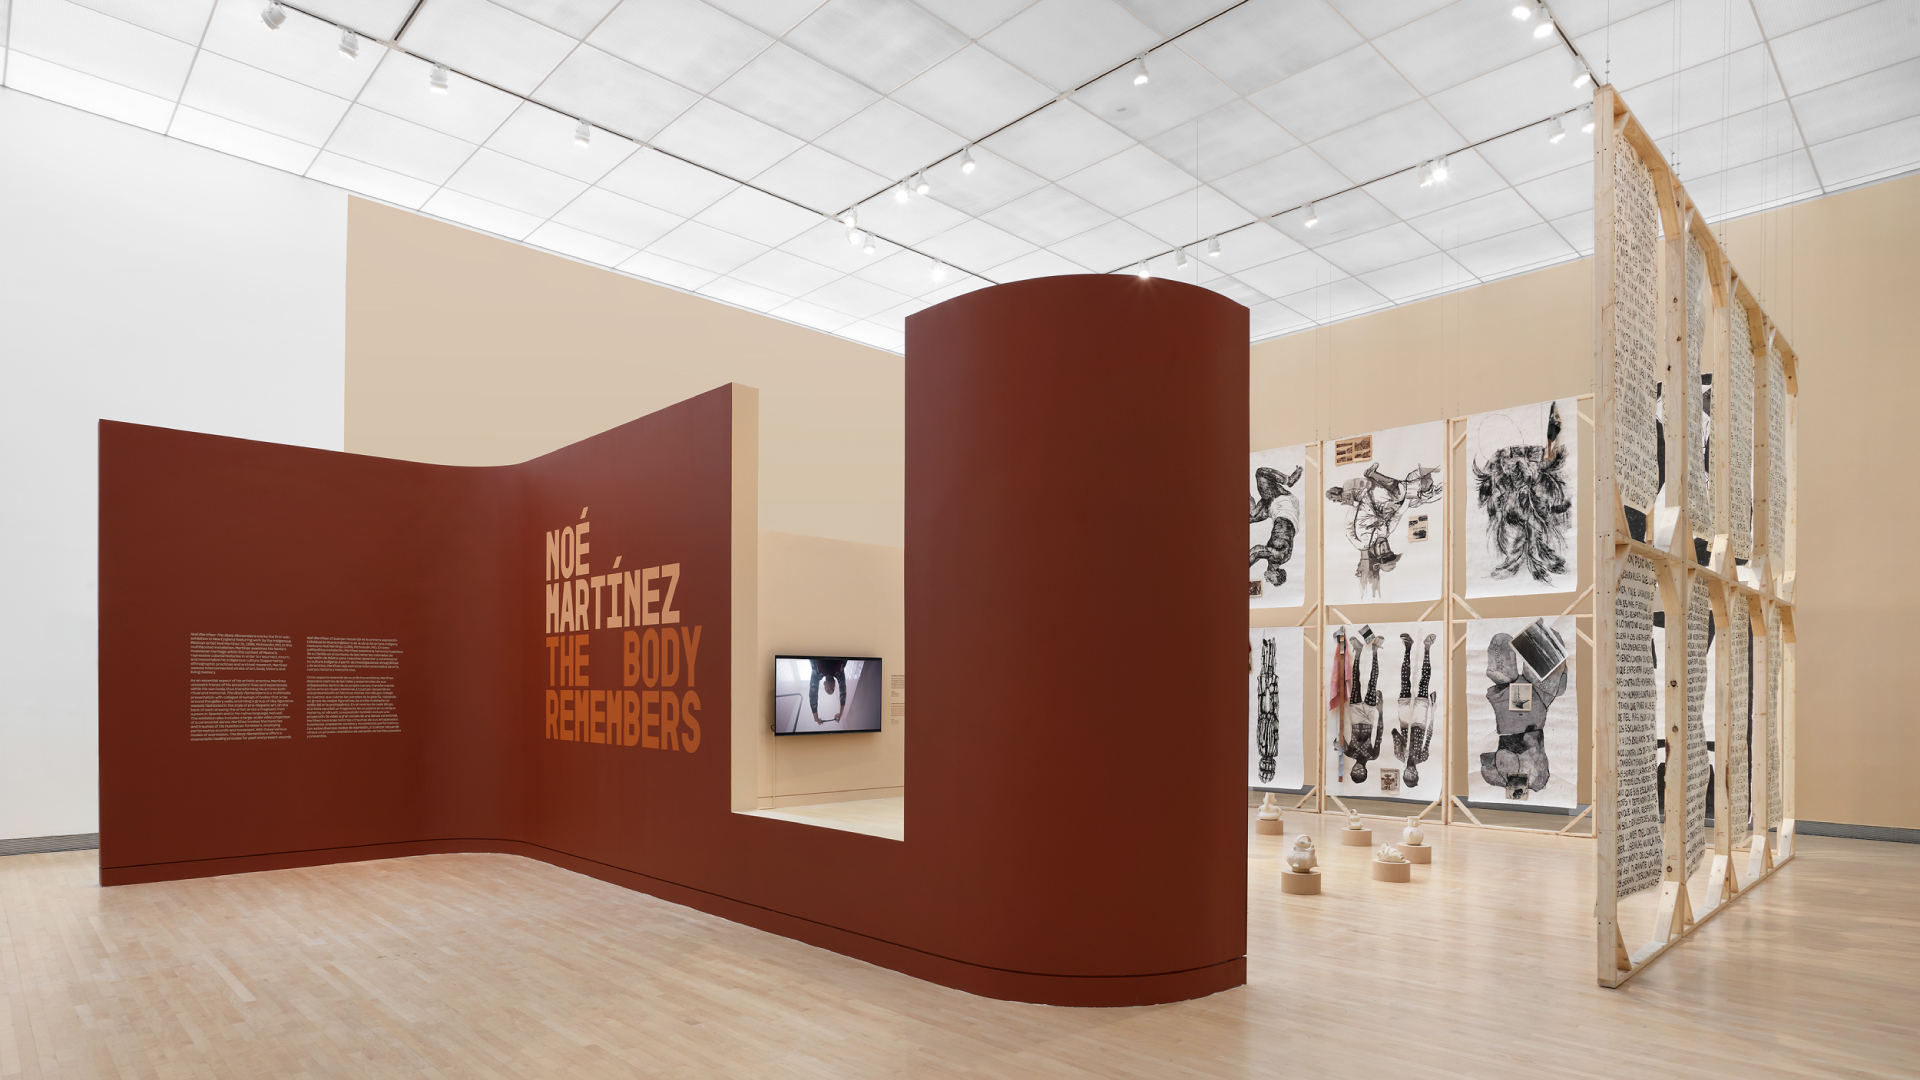 Installation view of "Noé Martínez: The Body Remembers"